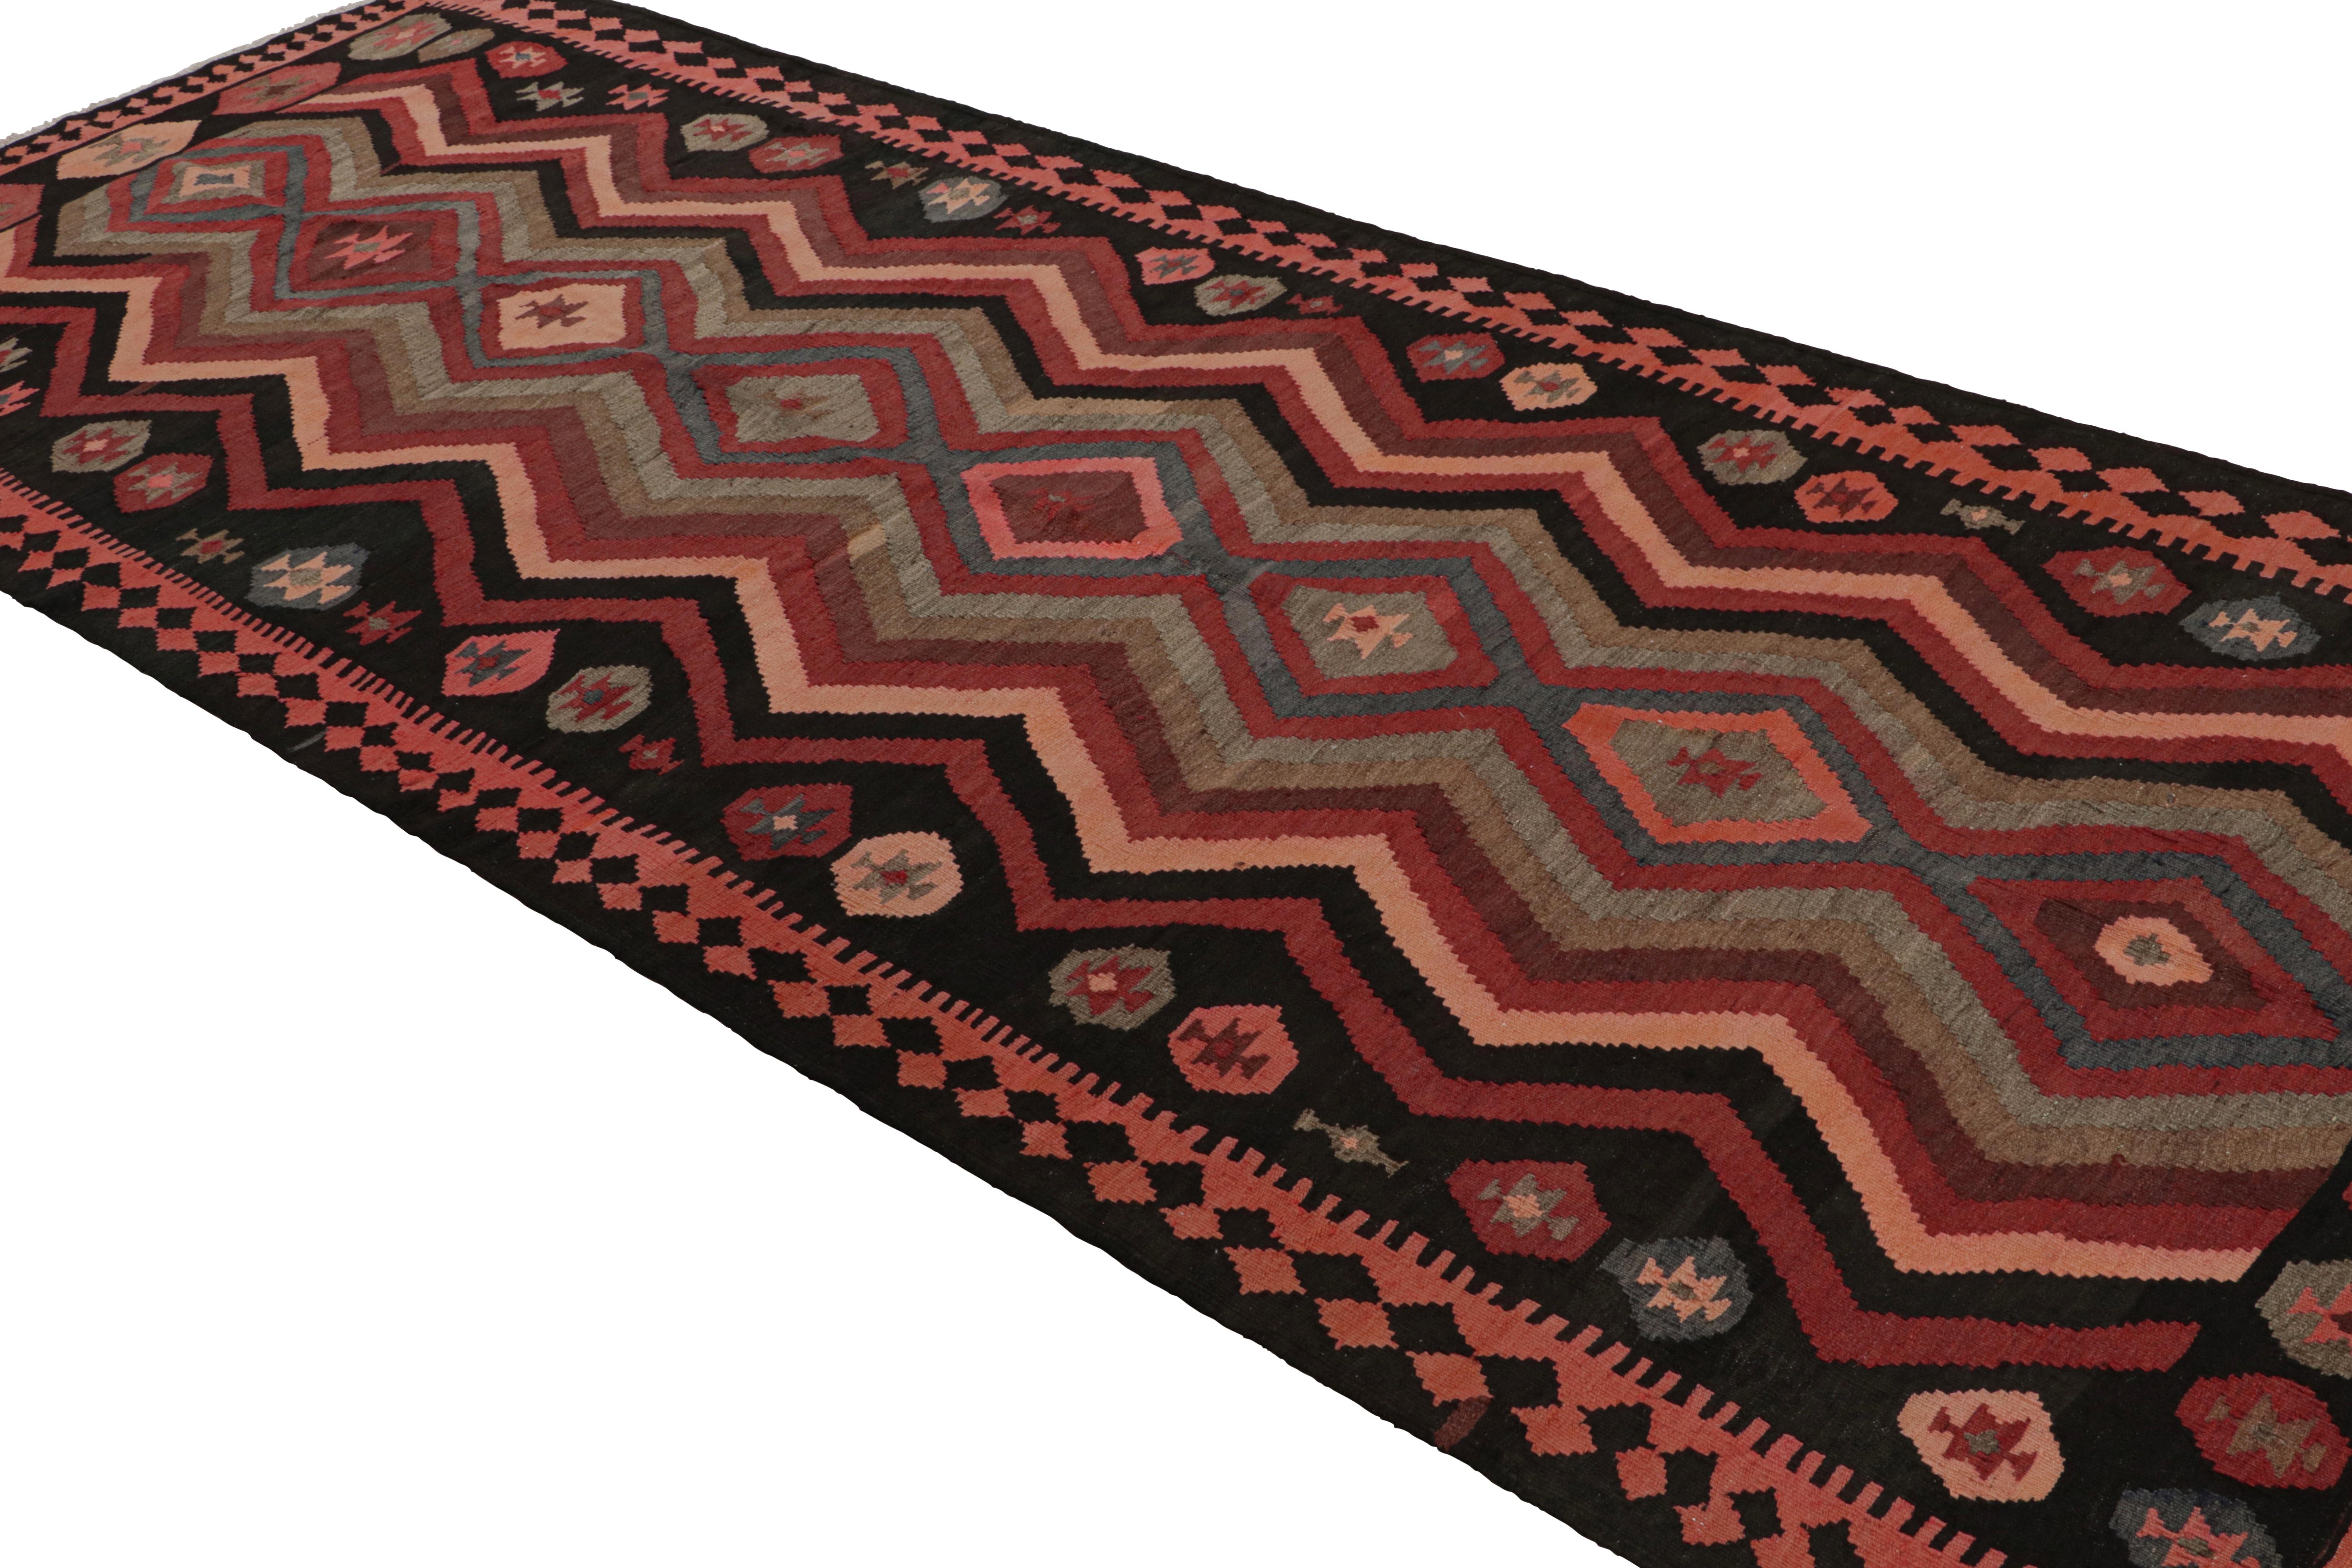 Handwoven in wool, circa 1950-1960, this 5x12 vintage Afghani tribal kilim rug, from Afghanistan, features repetitive geometric patterns like chevrons, motifs and fencepost patterns, making it a rich and unusual piece. 

On the Design: 

Originating